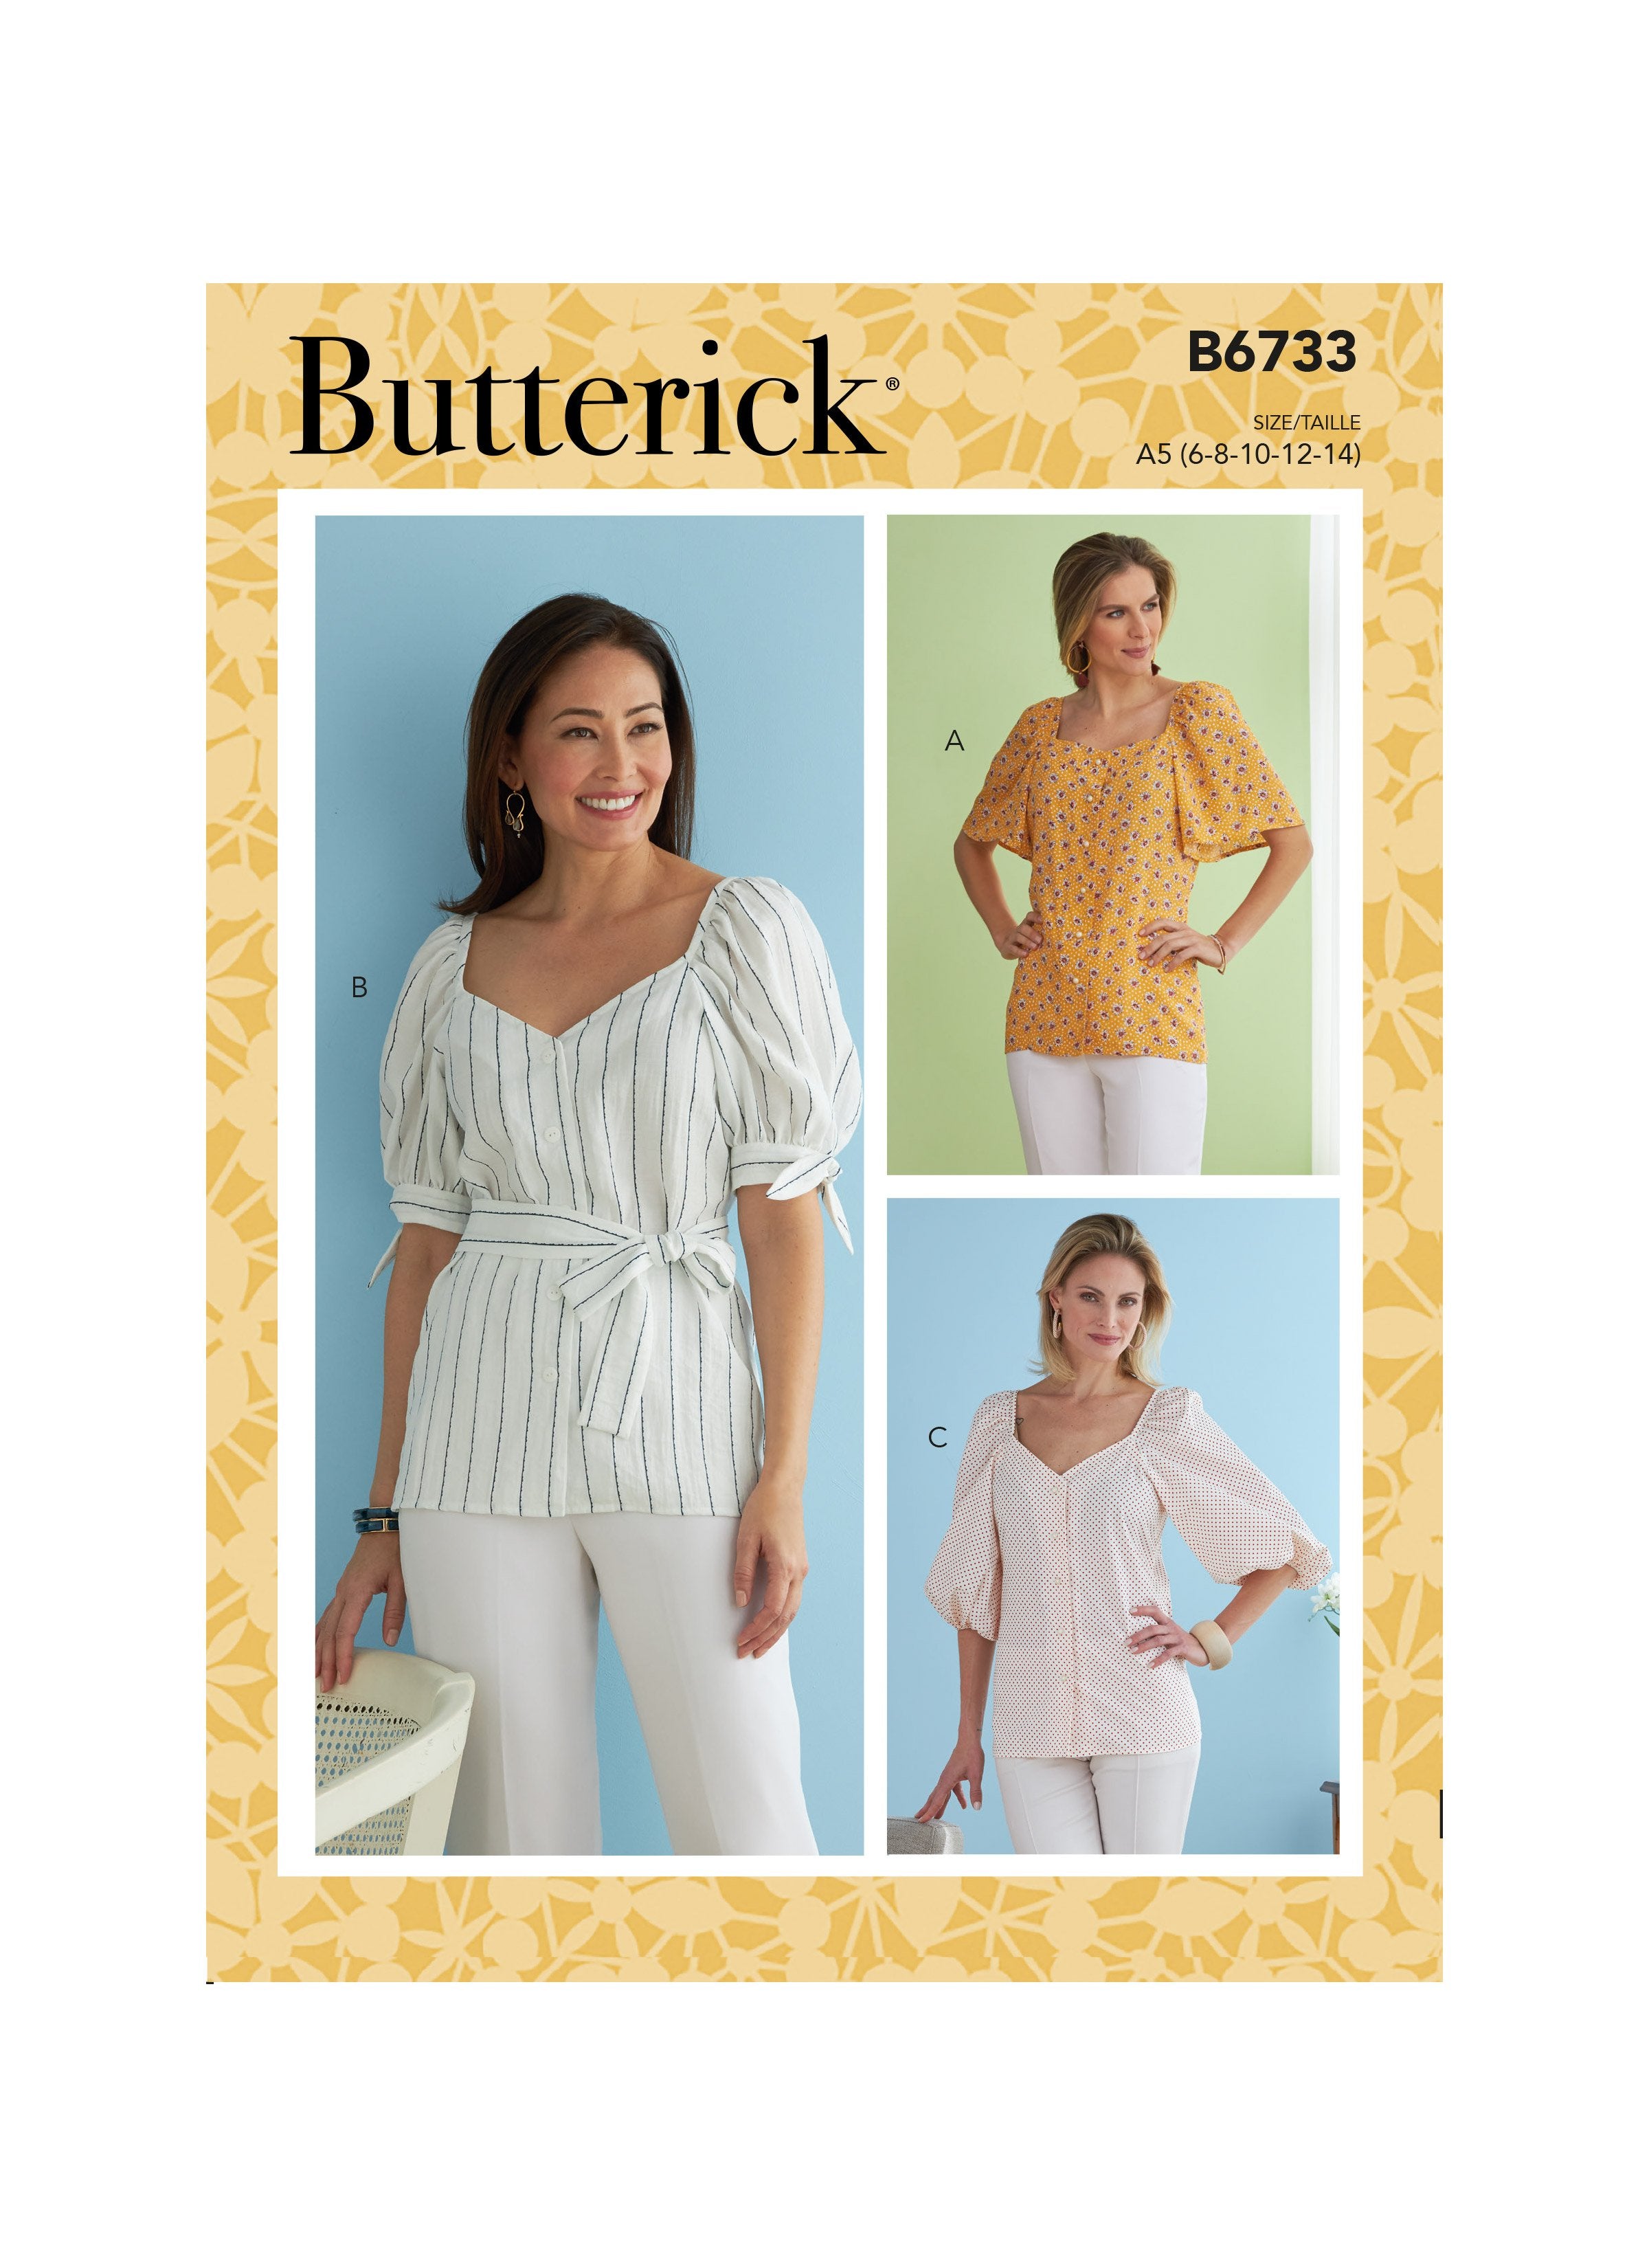 Butterick Sewing Pattern 6733 Misses' Top from Jaycotts Sewing Supplies